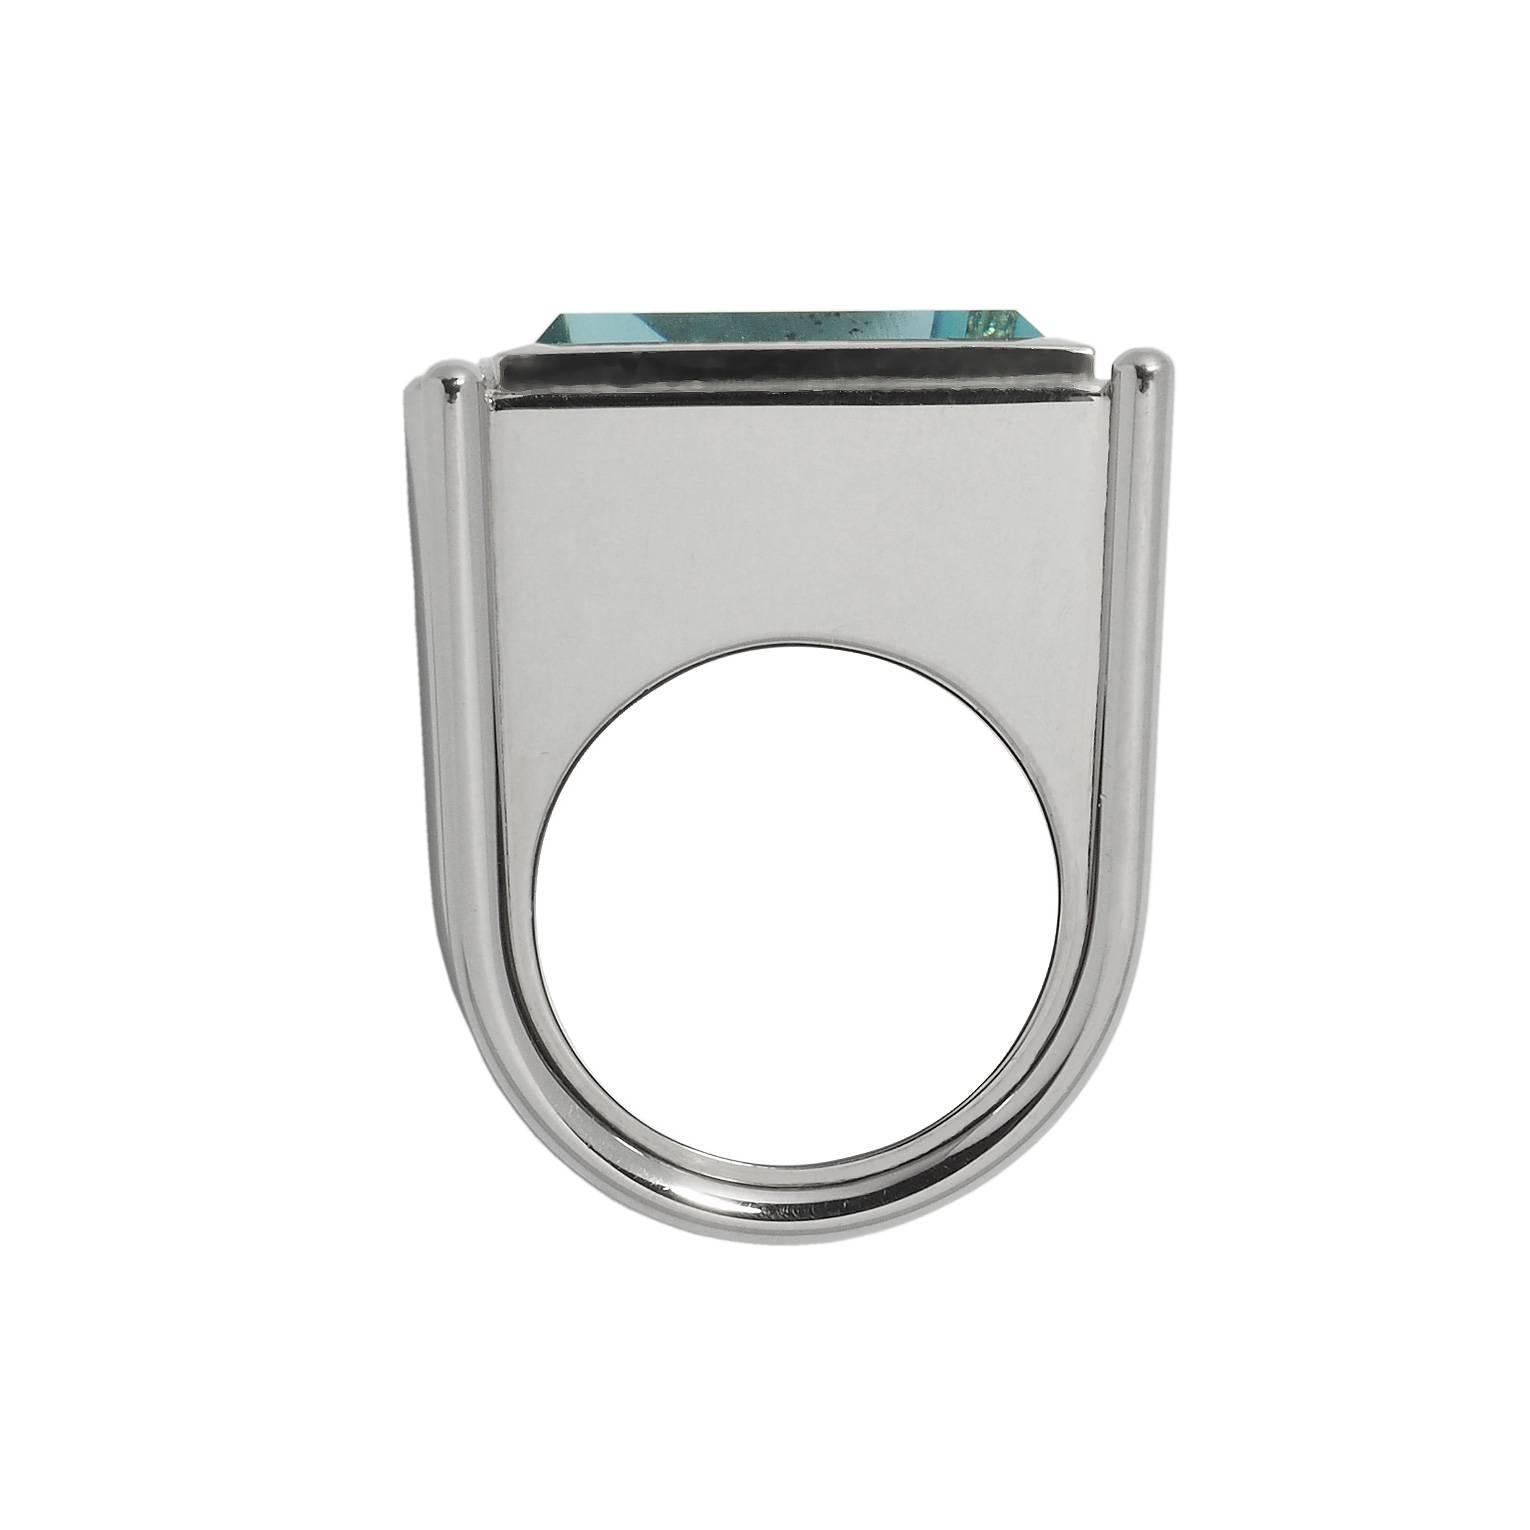 This square setting is very modern and enhances the mirrored cut aquamarine 33.4 ct. Designed by Colleen B. Rosenblat.
Ring size: 57